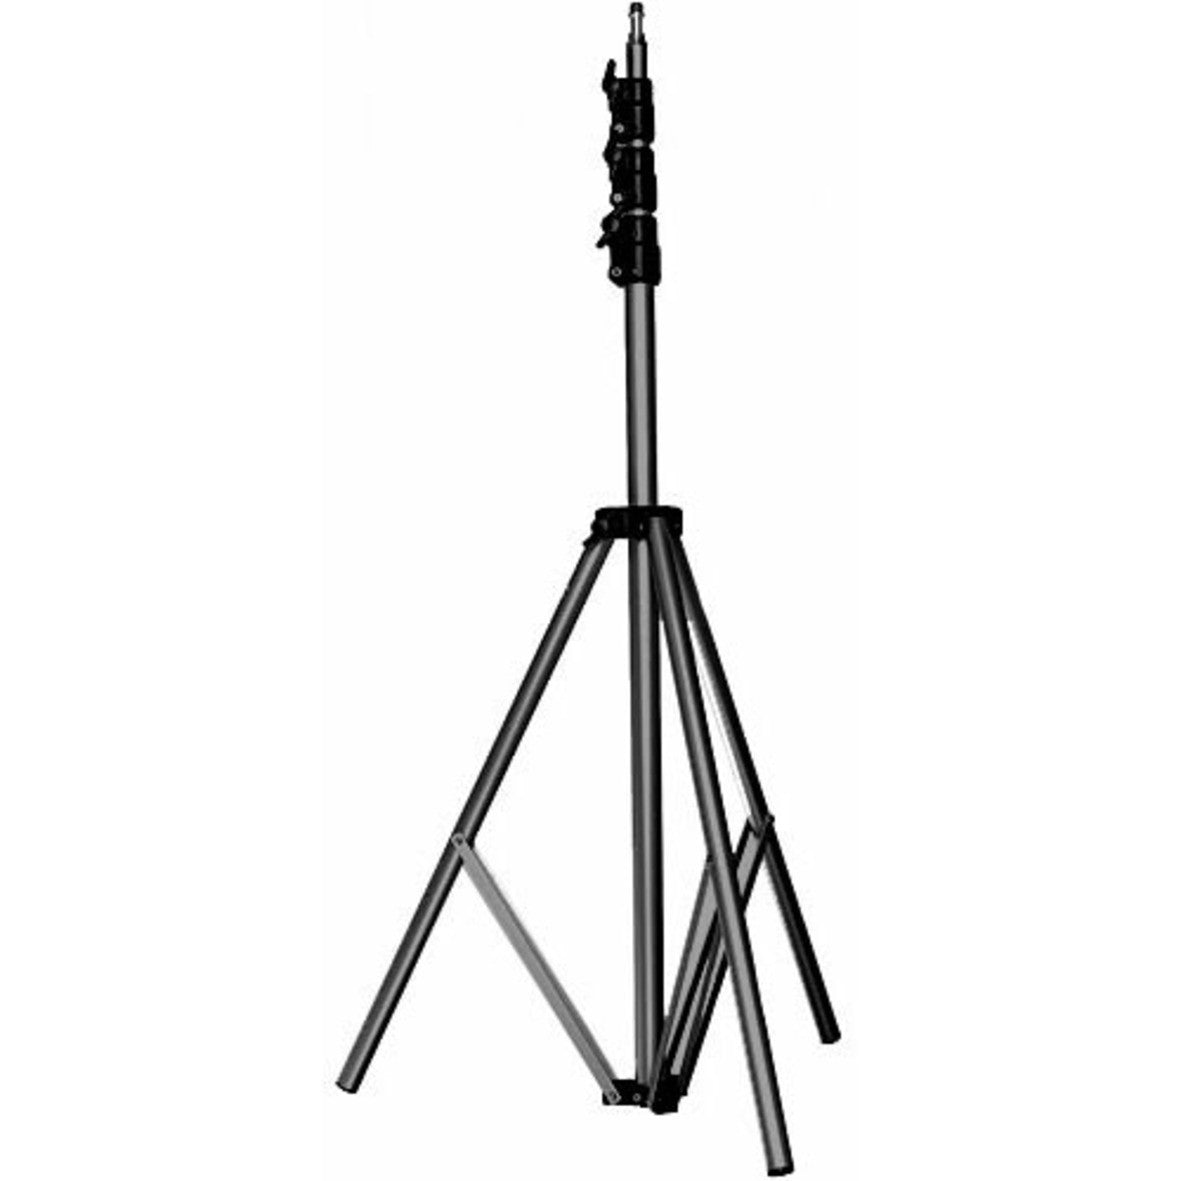 Manfrotto 368B 11' Basic Light Stand, supports regular stands, Manfrotto - Pictureline 